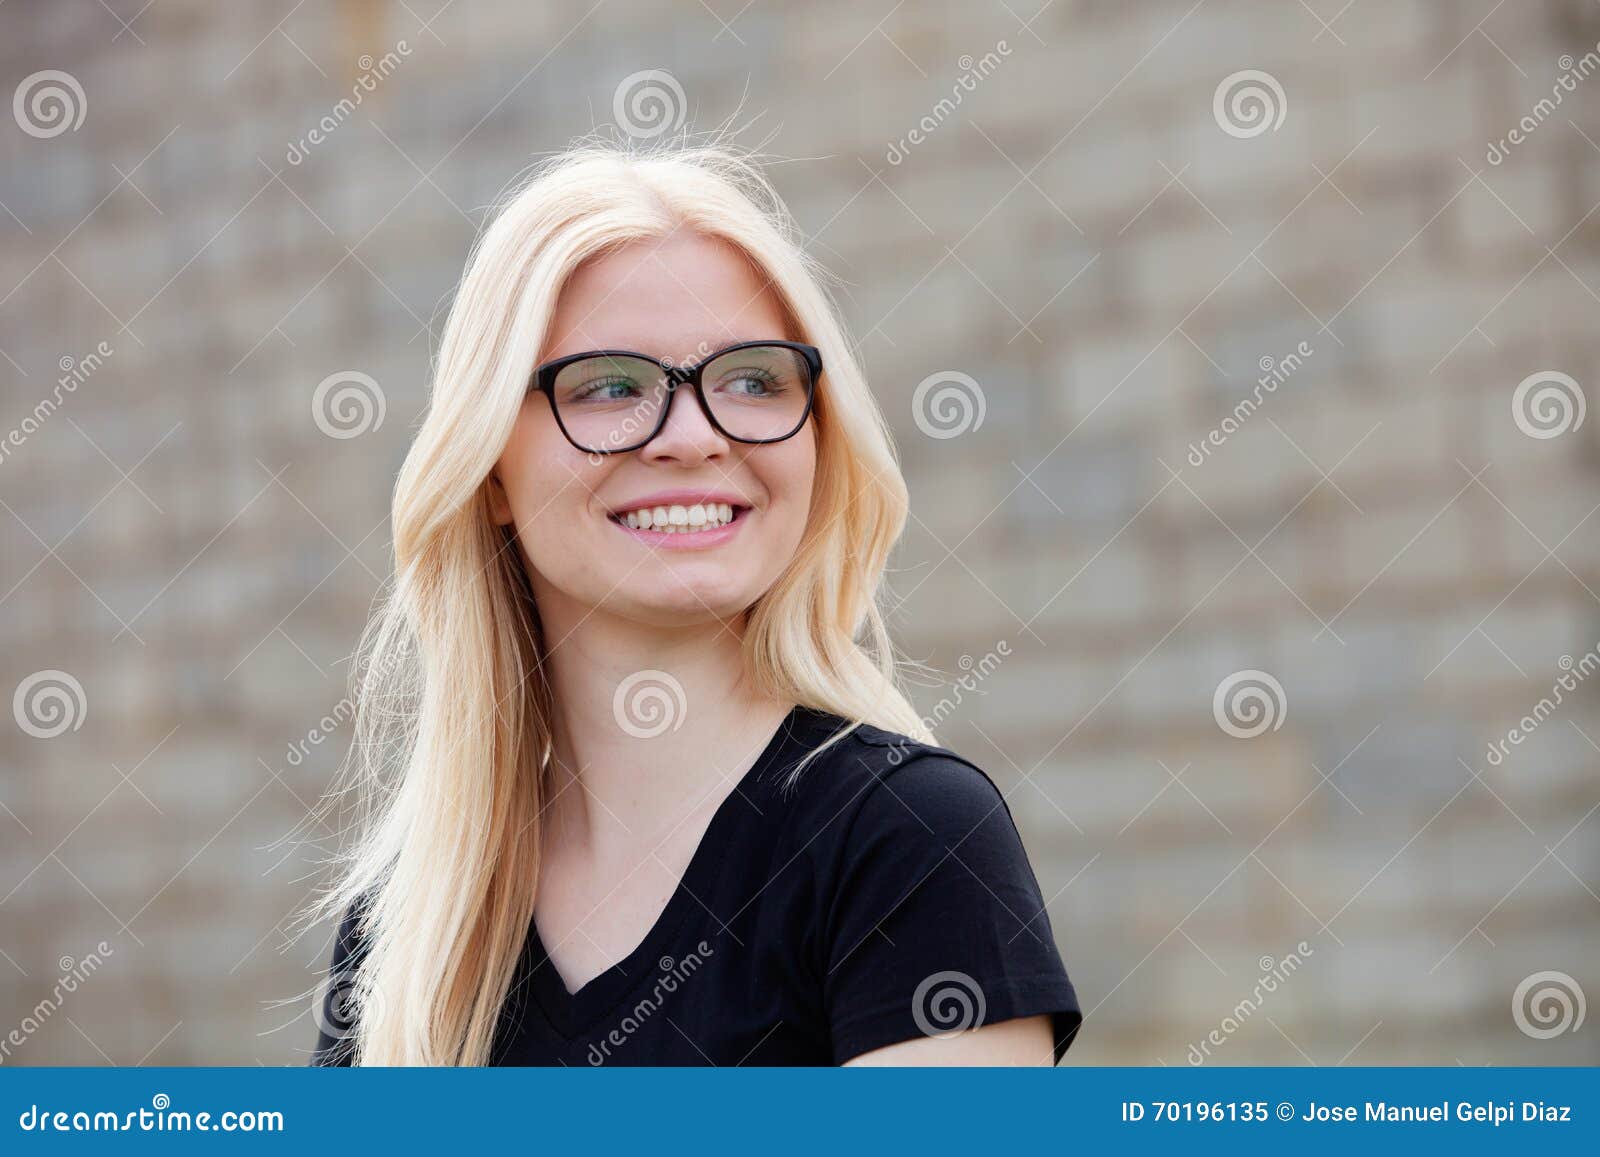 White Glasses and Blonde Hair - wide 5